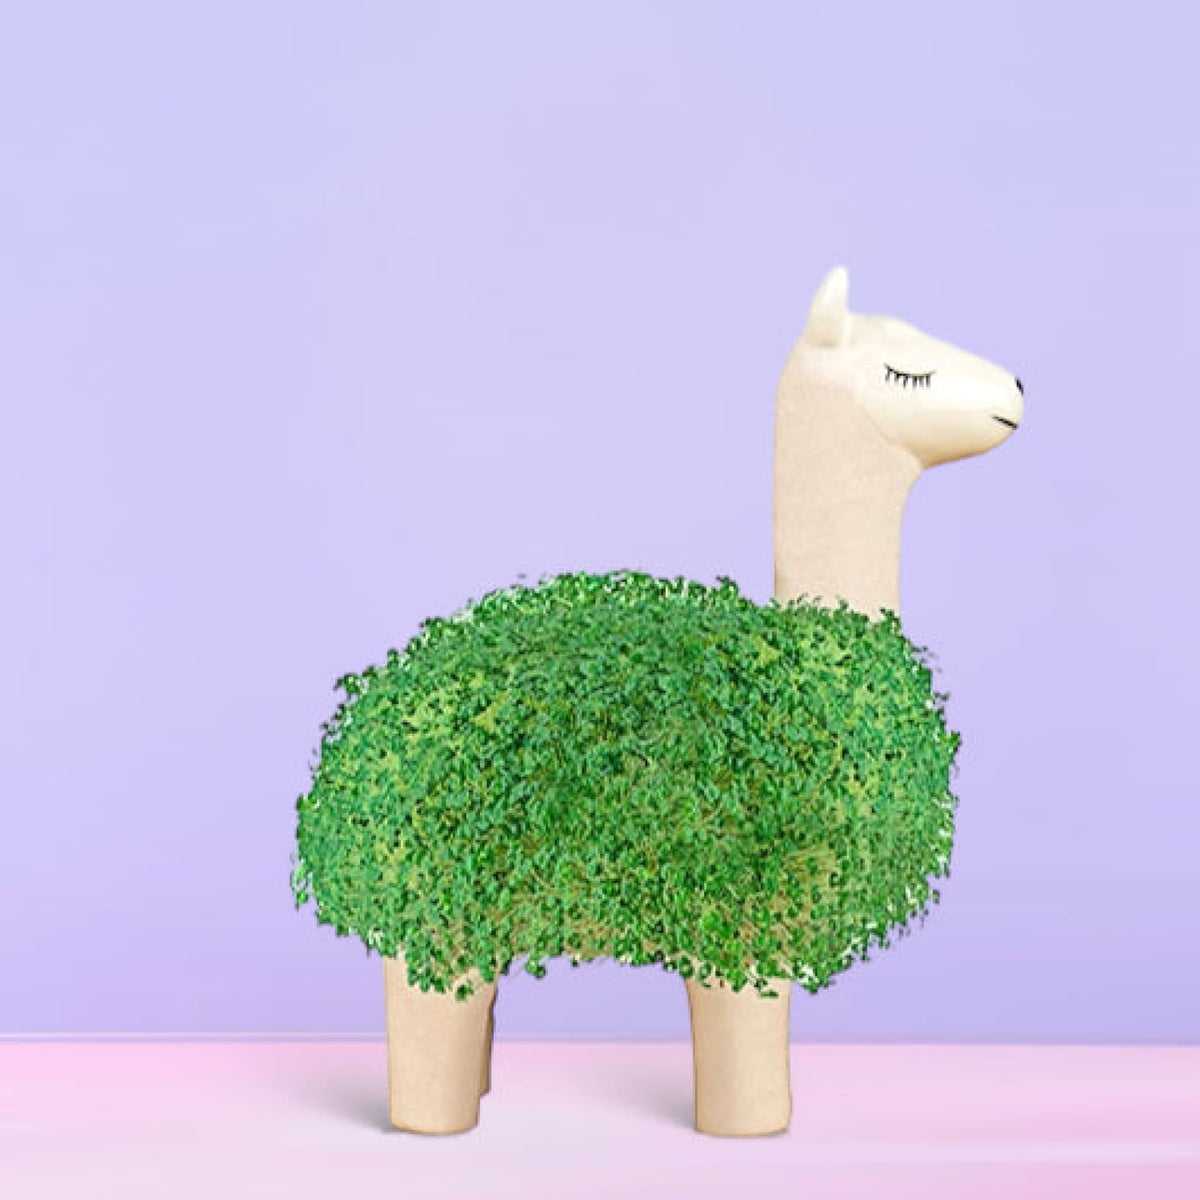 Chia Seed Animal Planter - For Mom Gifts Gardening Indoor